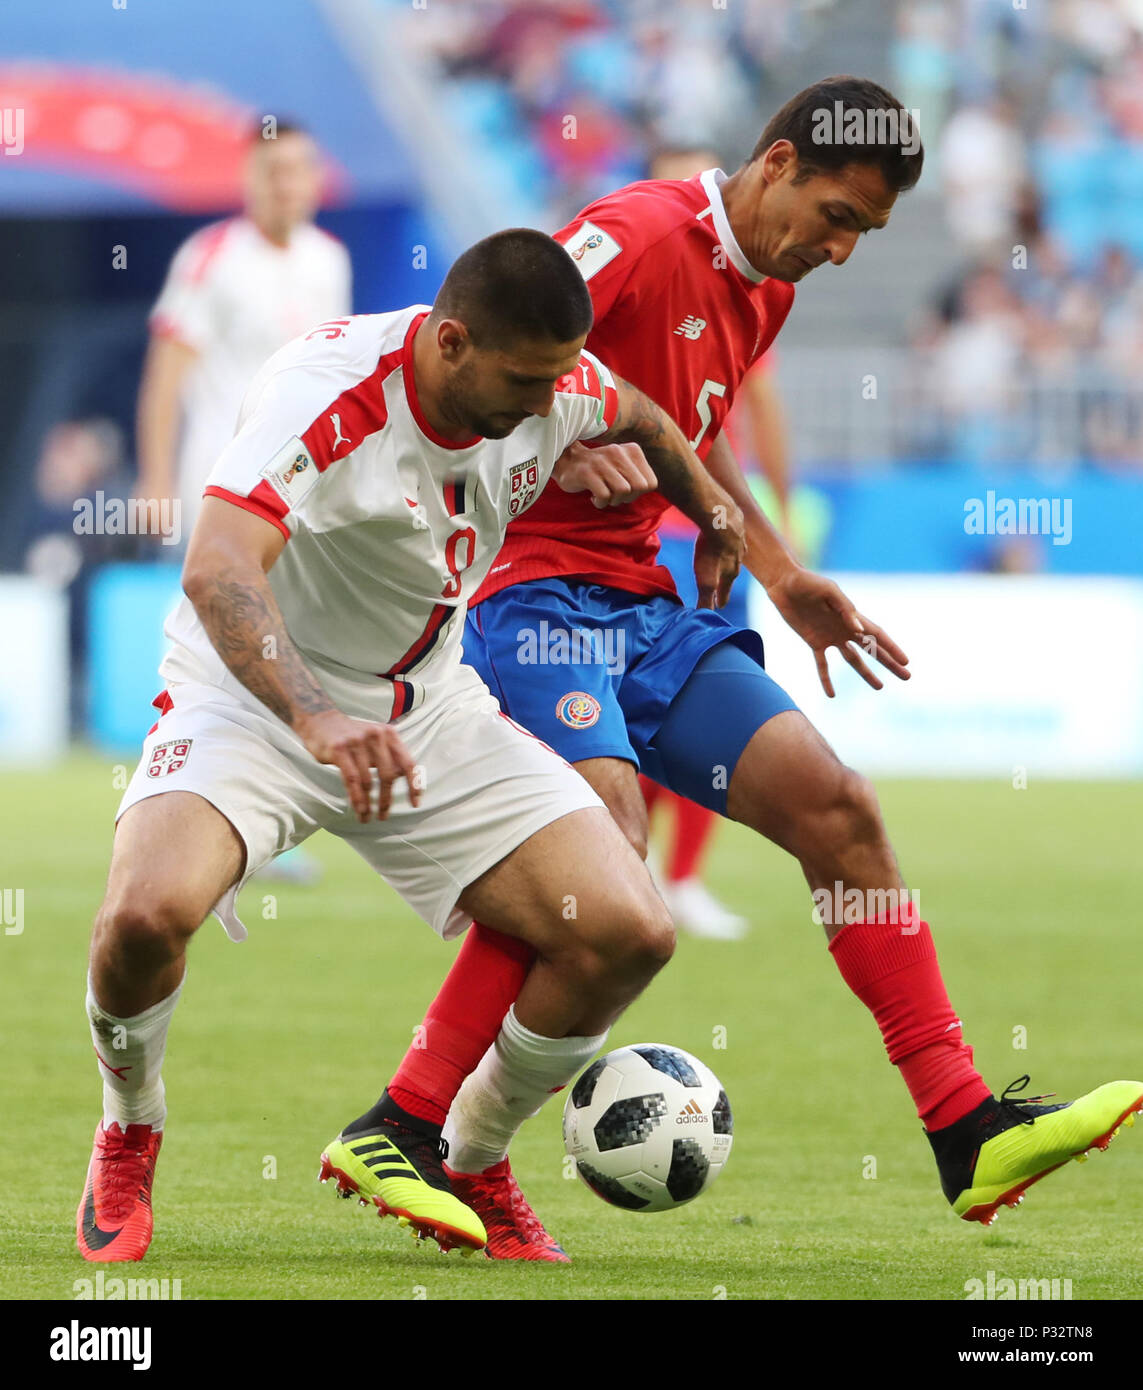 Samara, Russia. 17th June, 2018. Celso Borges (R) of Costa Rica vies with Aleksandar Mitrovic of Serbia during a group E match between Costa Rica and Serbia at the 2018 FIFA World Cup in Samara, Russia, June 17, 2018. Credit: Ye Pingfan/Xinhua/Alamy Live News Stock Photo